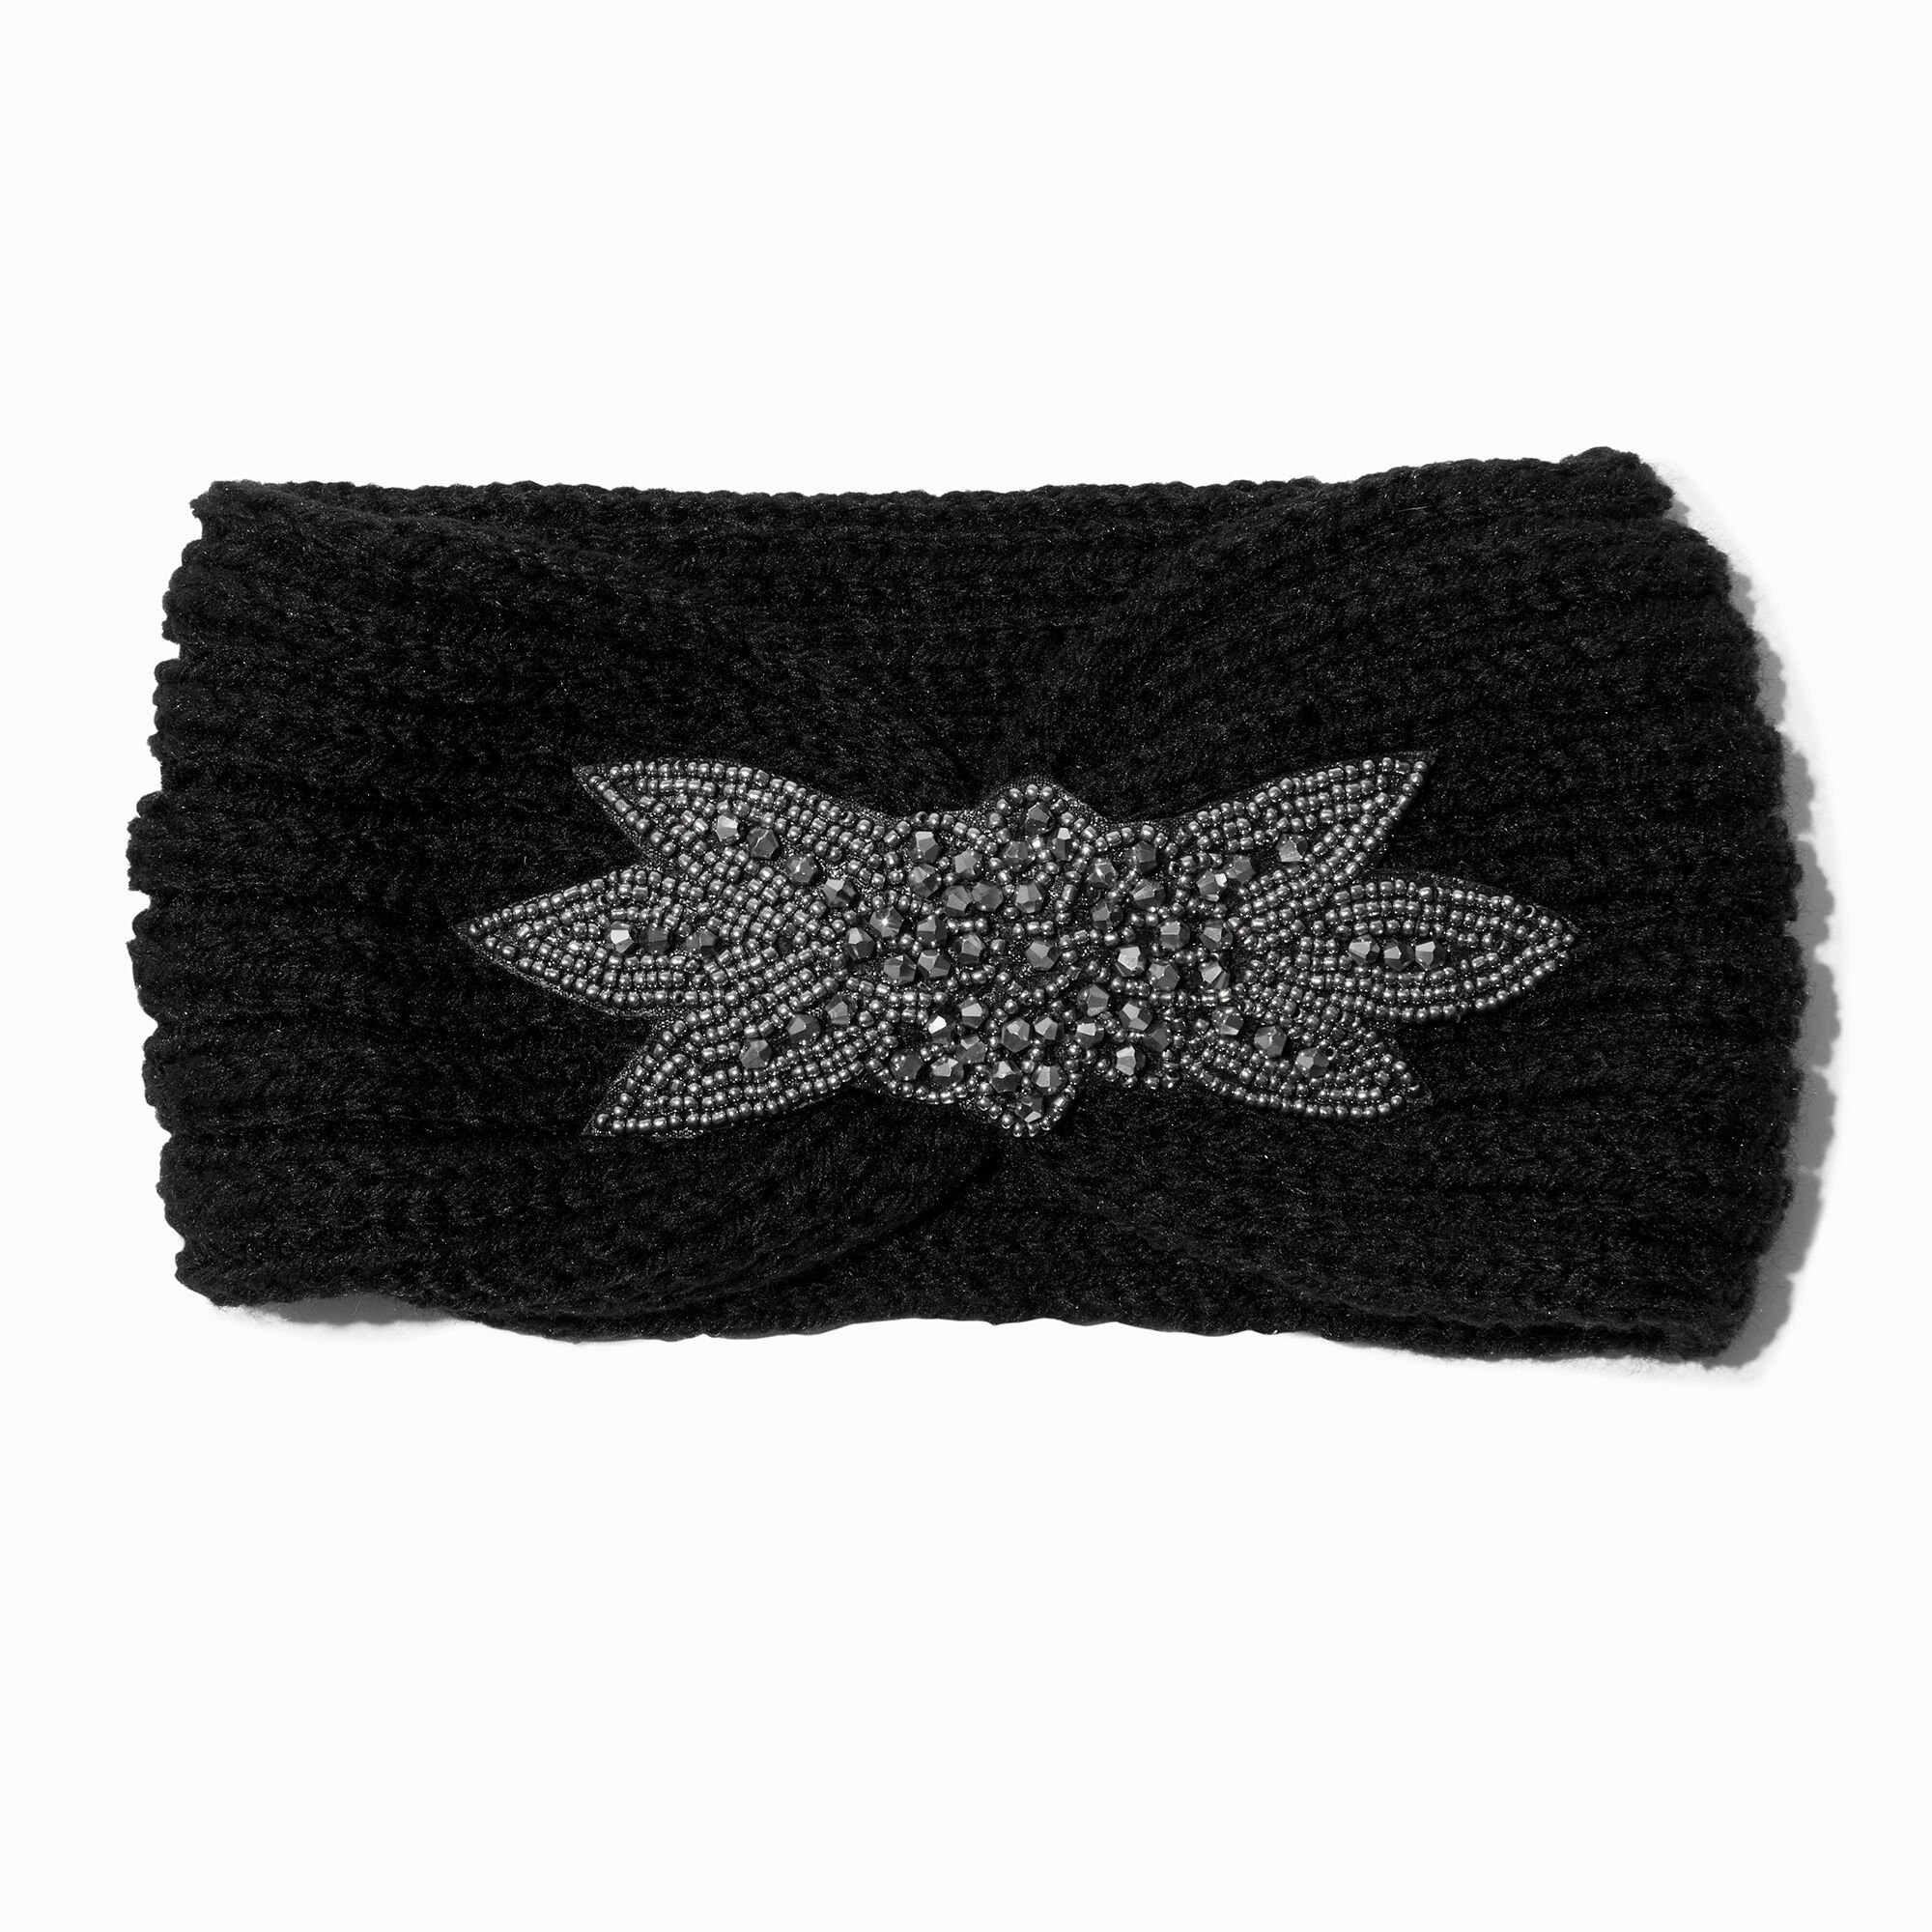 View Claires Sweater Knit Beaded Headwrap Black information